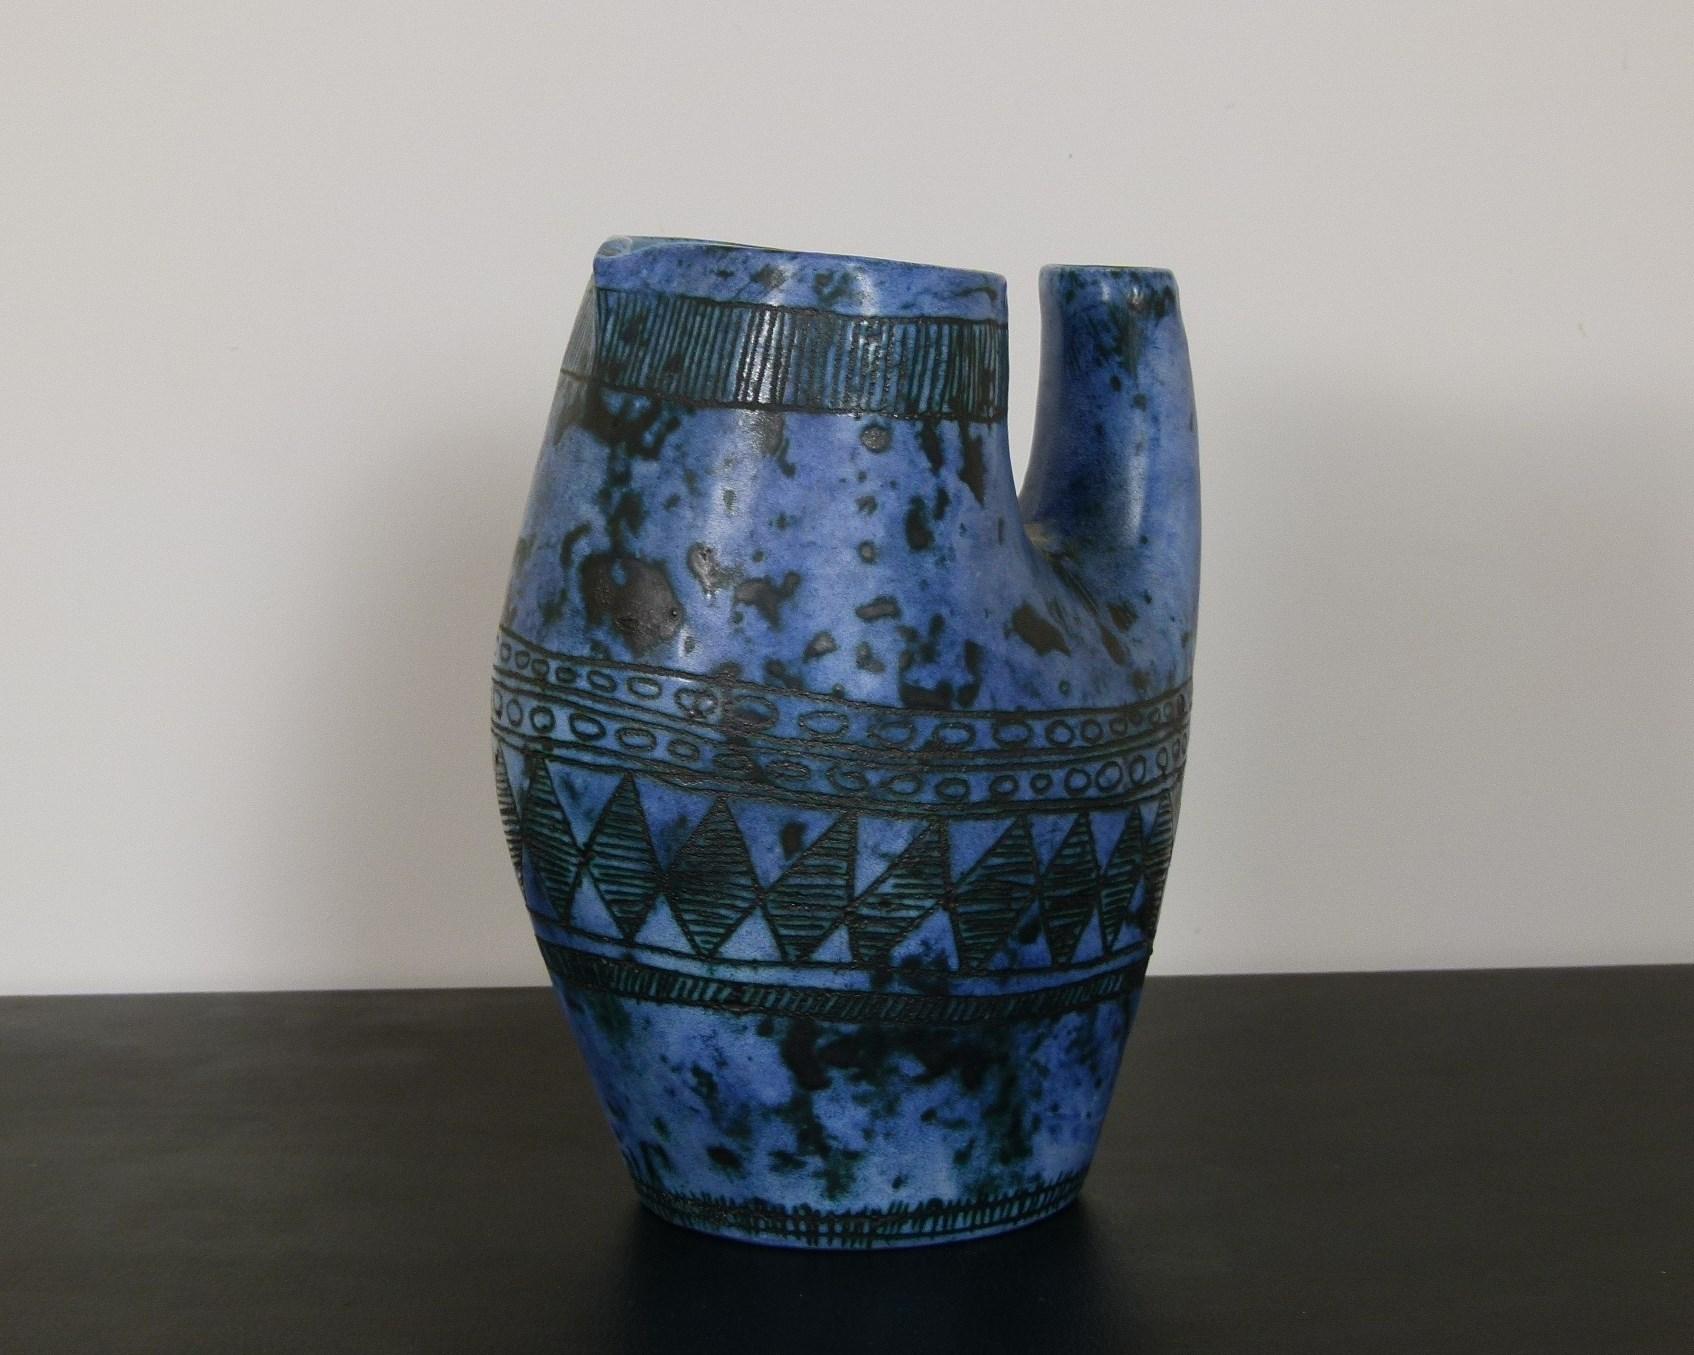 Blue ceramic vase-pitcher,
French work by Jacques Blin.
Perfect original condition.